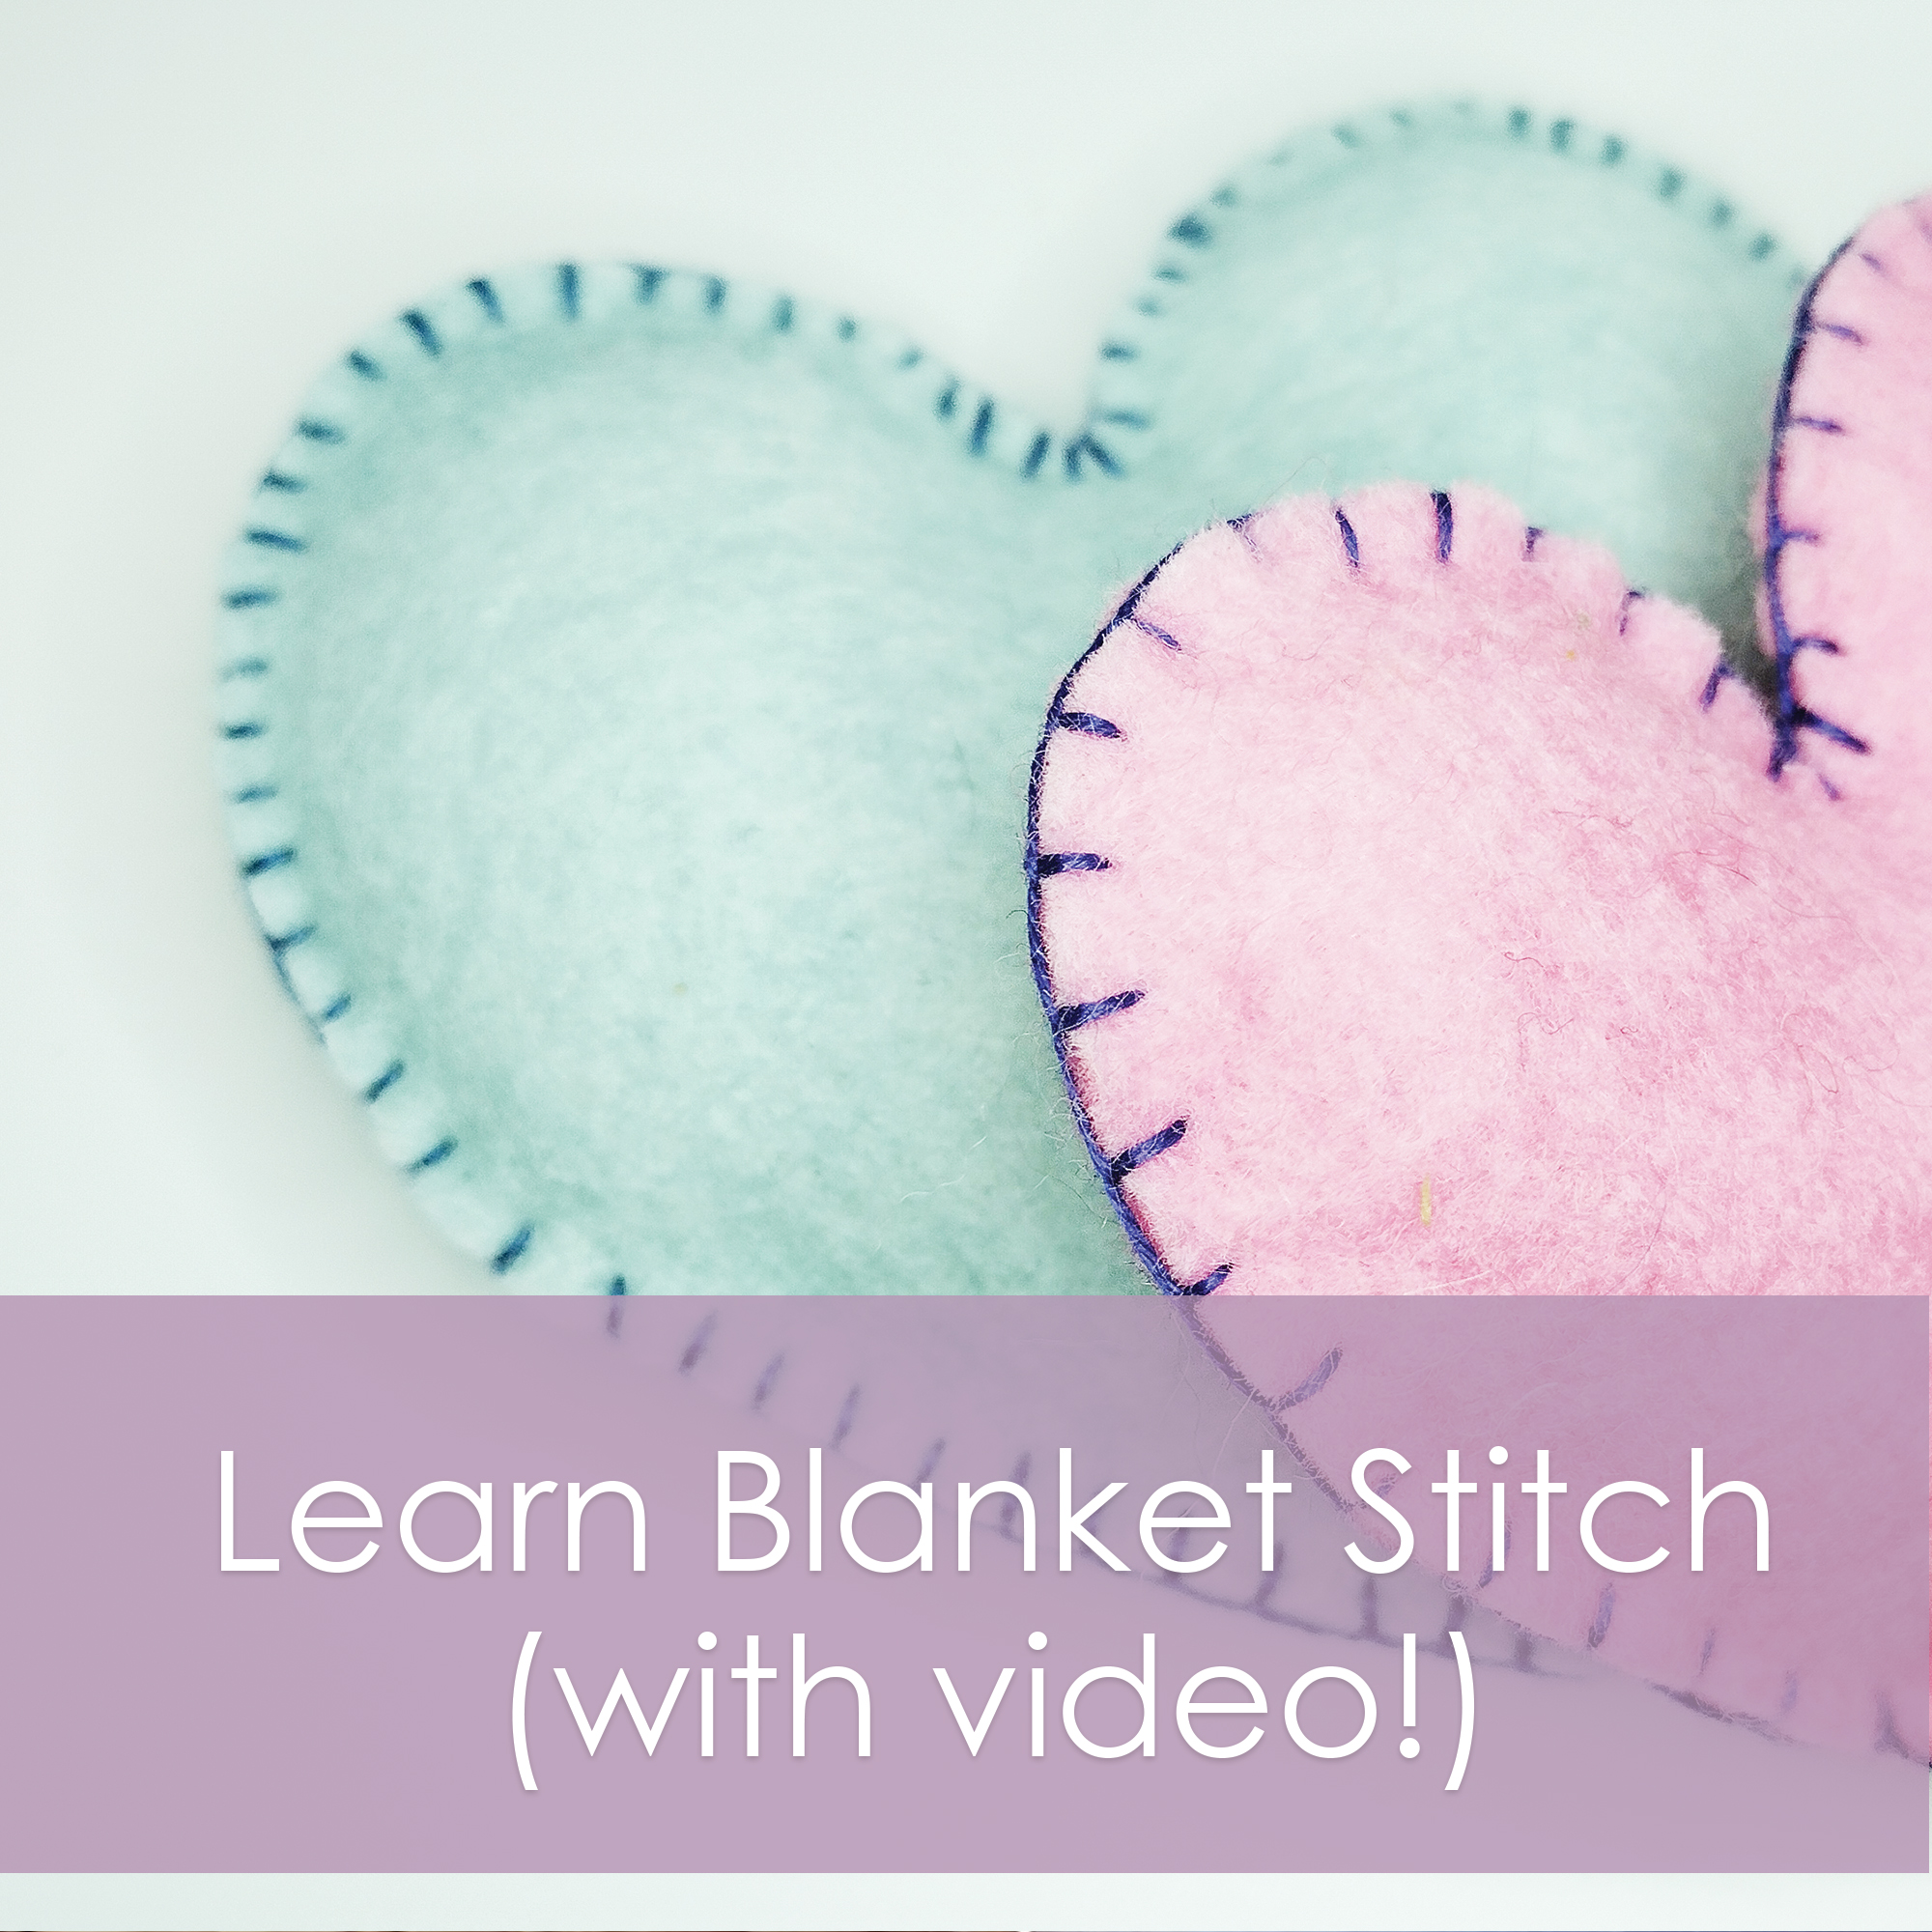 Learn how to do a blanket stitch with Chrissy from Muse of the Morning - how to start and to end the thread, how to go around corners and curves, and how to hide your knot!